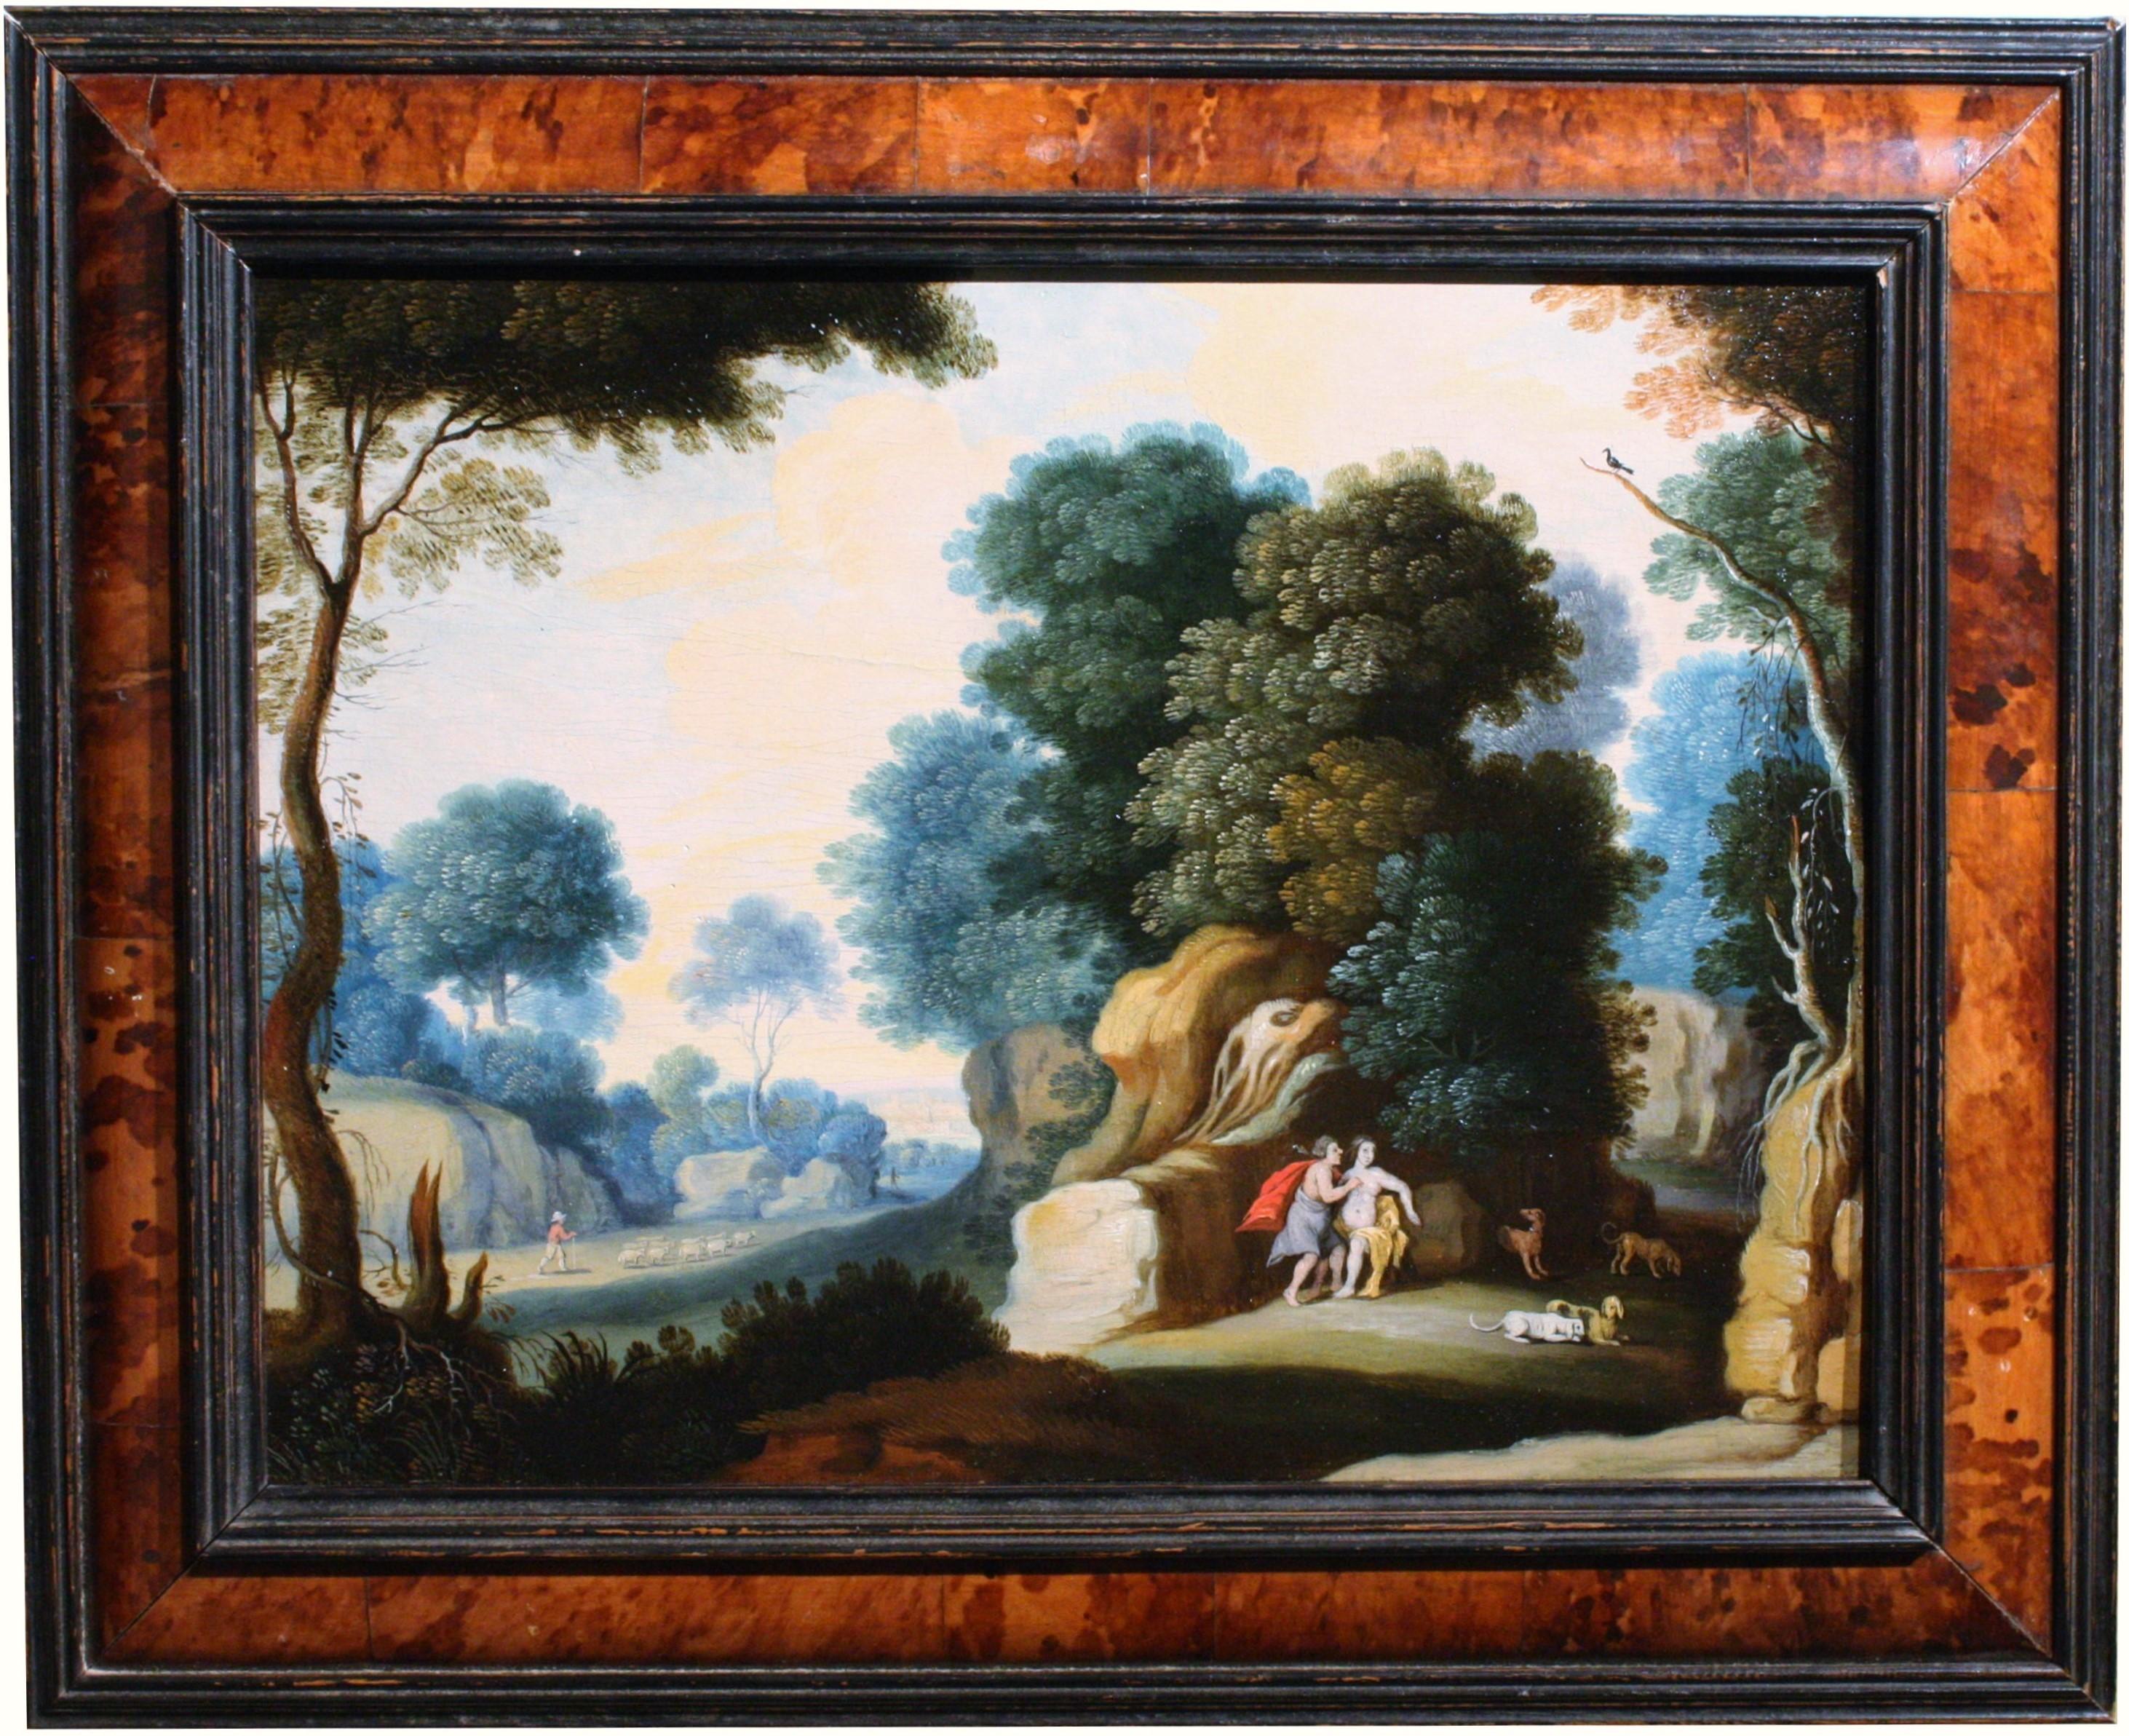 Idyllic landscape with myhological story of Cephalus and Procris
Early 17th century Italian school
Workshop Of Paul Bril (Antwerp, 1554 - Roma, 1626)
Oil on poplar panel: H. 28 cm (11 in.), W. 36.5 (14.17)
With a beautiful brown wood veneered